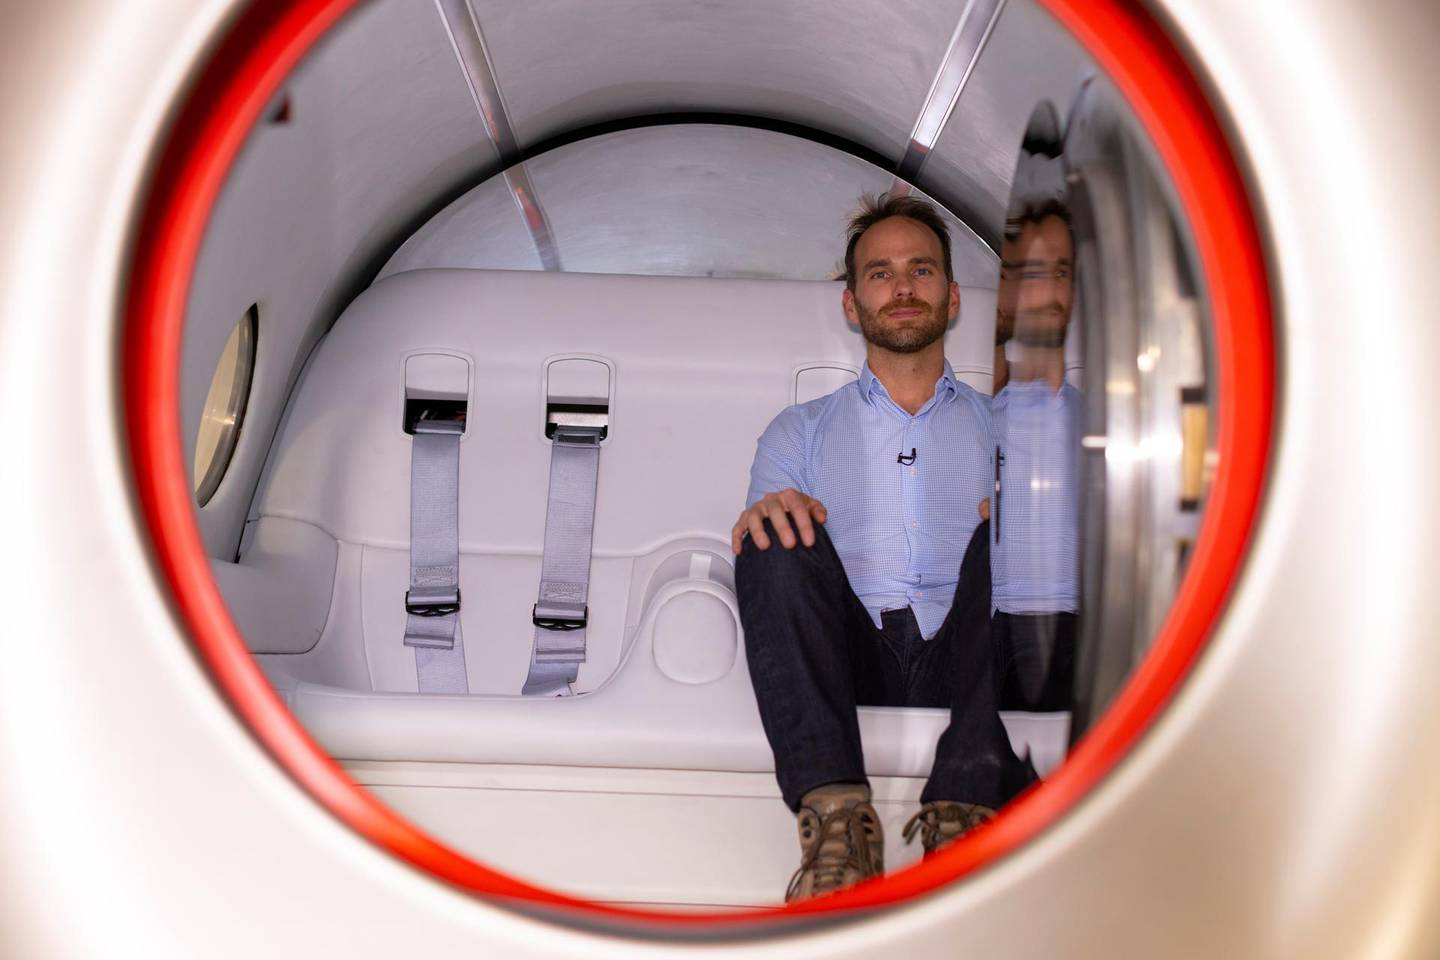 Josh Giegel, co-founder and CEO of Virgin Hyperloop, poses inside a prototype pod at the company's hyperloop facility near Las Vegas, Nevada, May 5, 2021. Picture taken May 5, 2021. REUTERS/Mike Blake